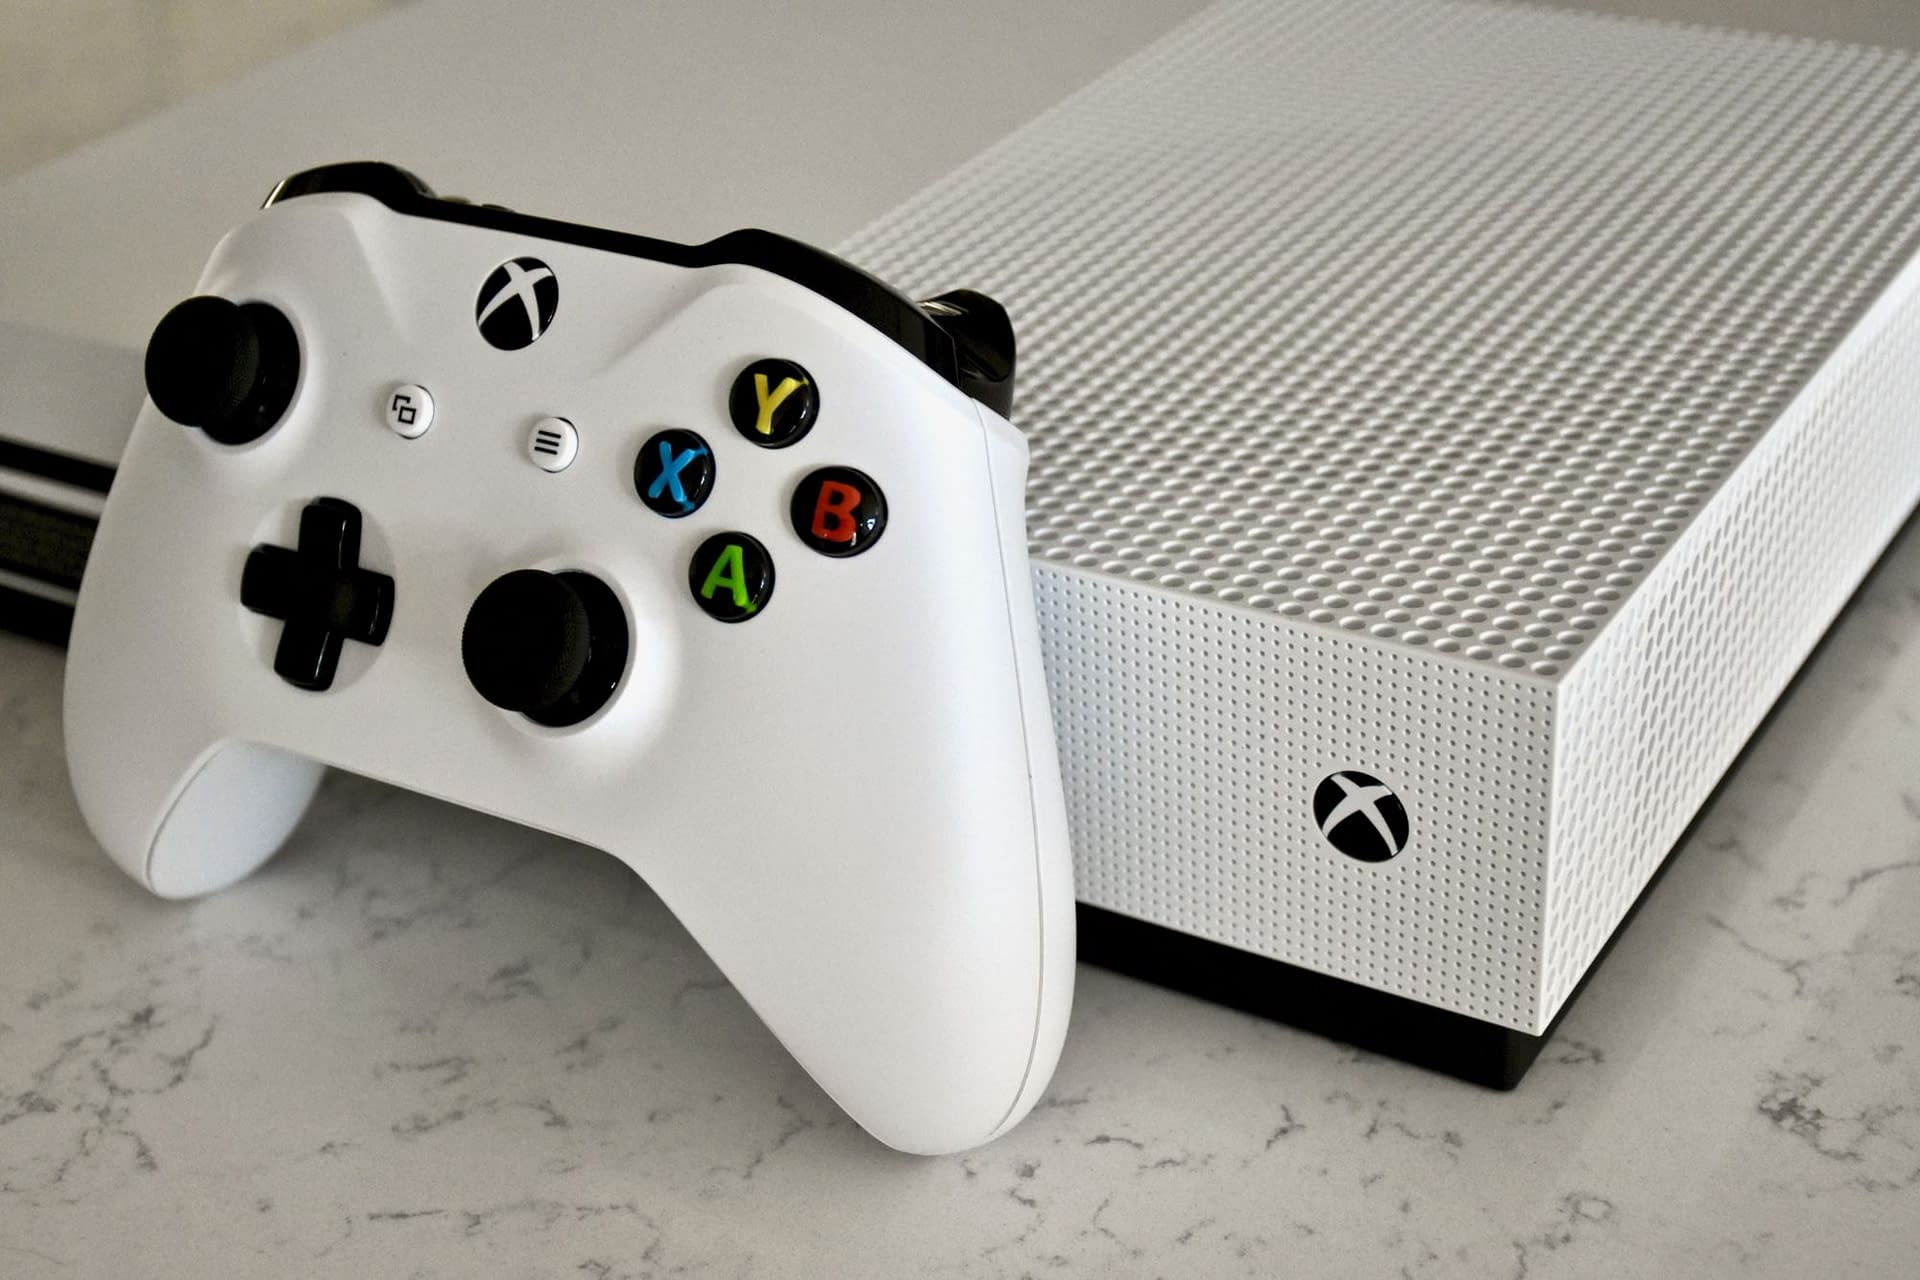 Xbox One manufacturing discontinued, Microsoft confirms - Polygon